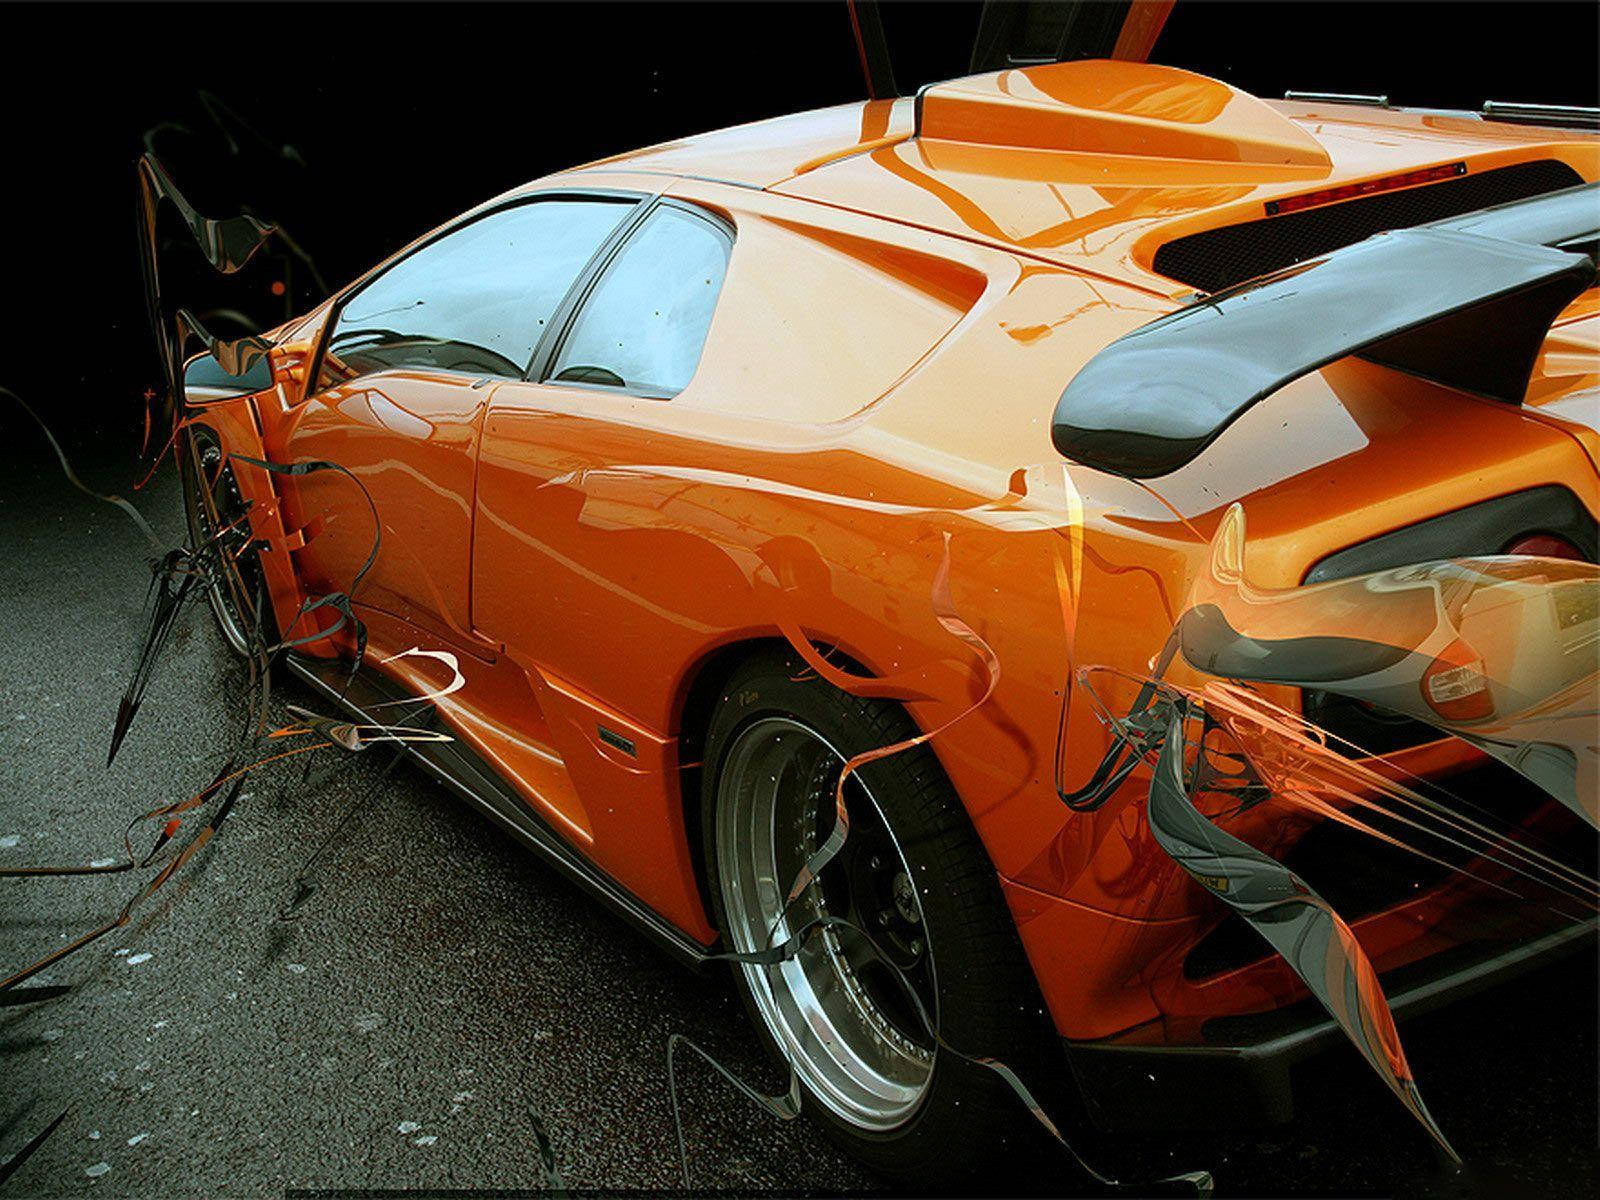 Orange 3D Car With Swirling Shapes Wallpaper